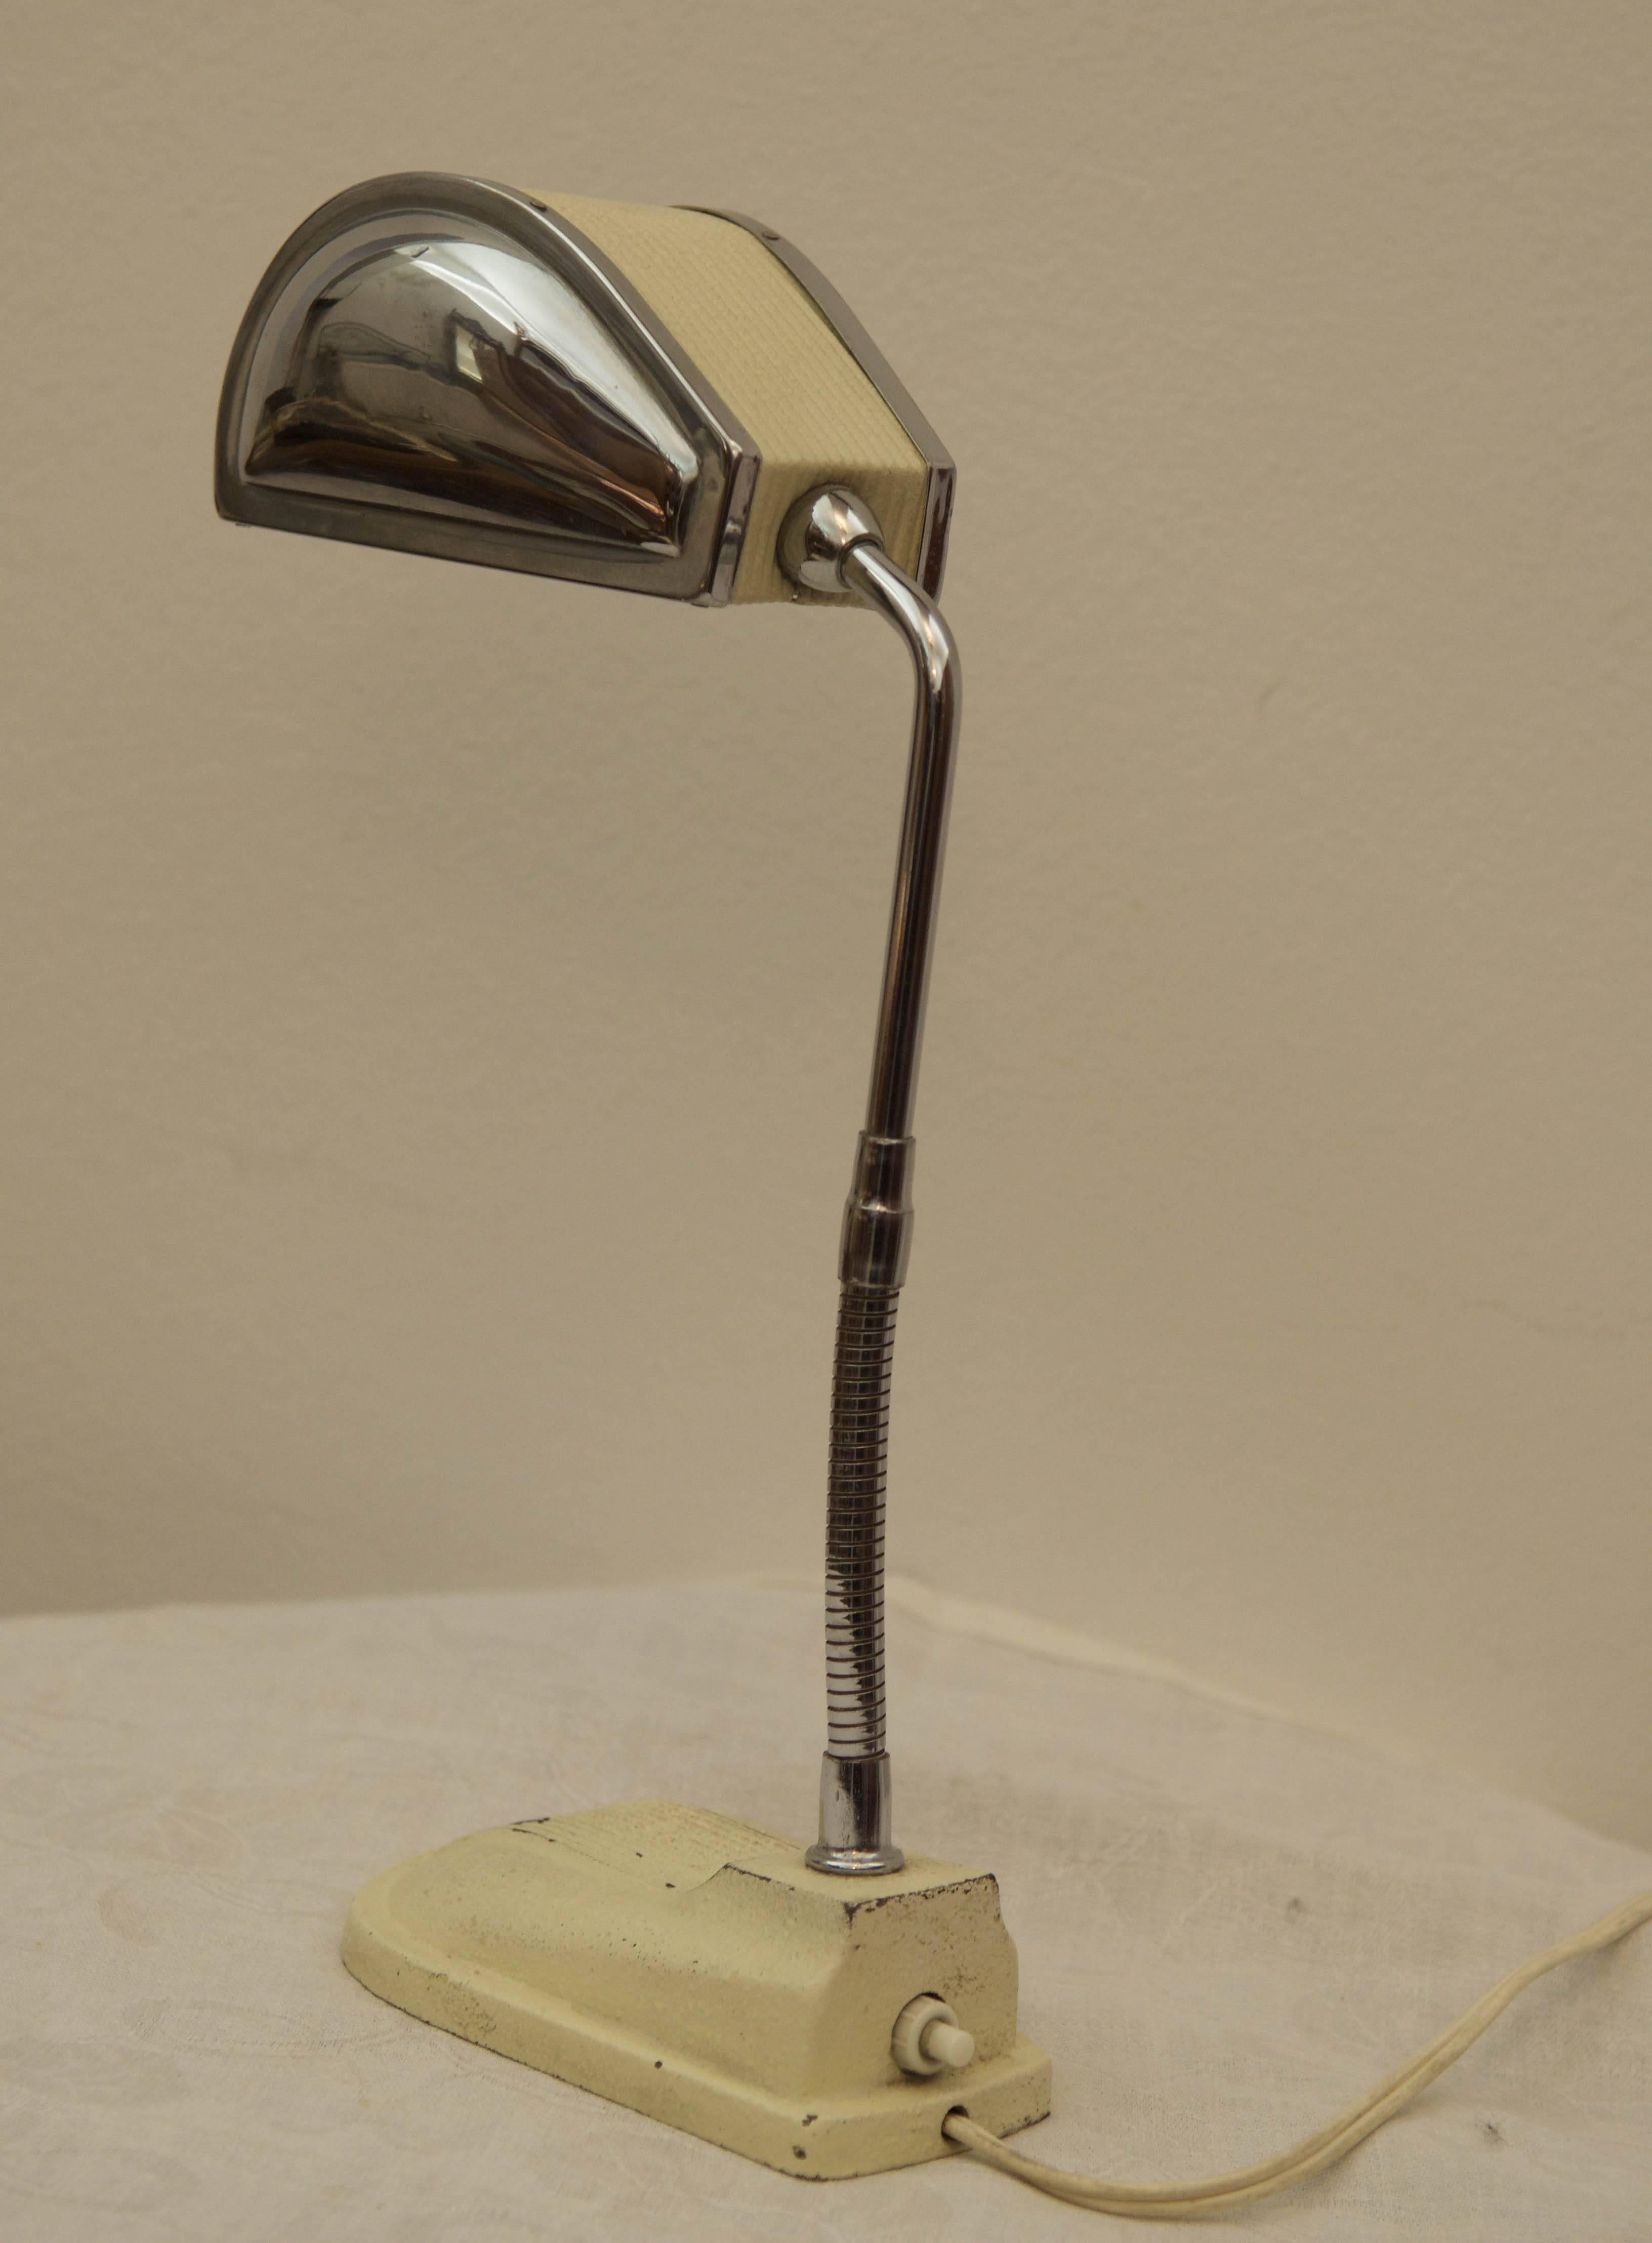 Often wrongly attributed to Eileen Gray was made in the 1940s. This Jumo lamp is very robust with a goose neck, the lampshade and the base of this small Jumo lamp has a design that recalls the style "streamline". This Anglicism literally